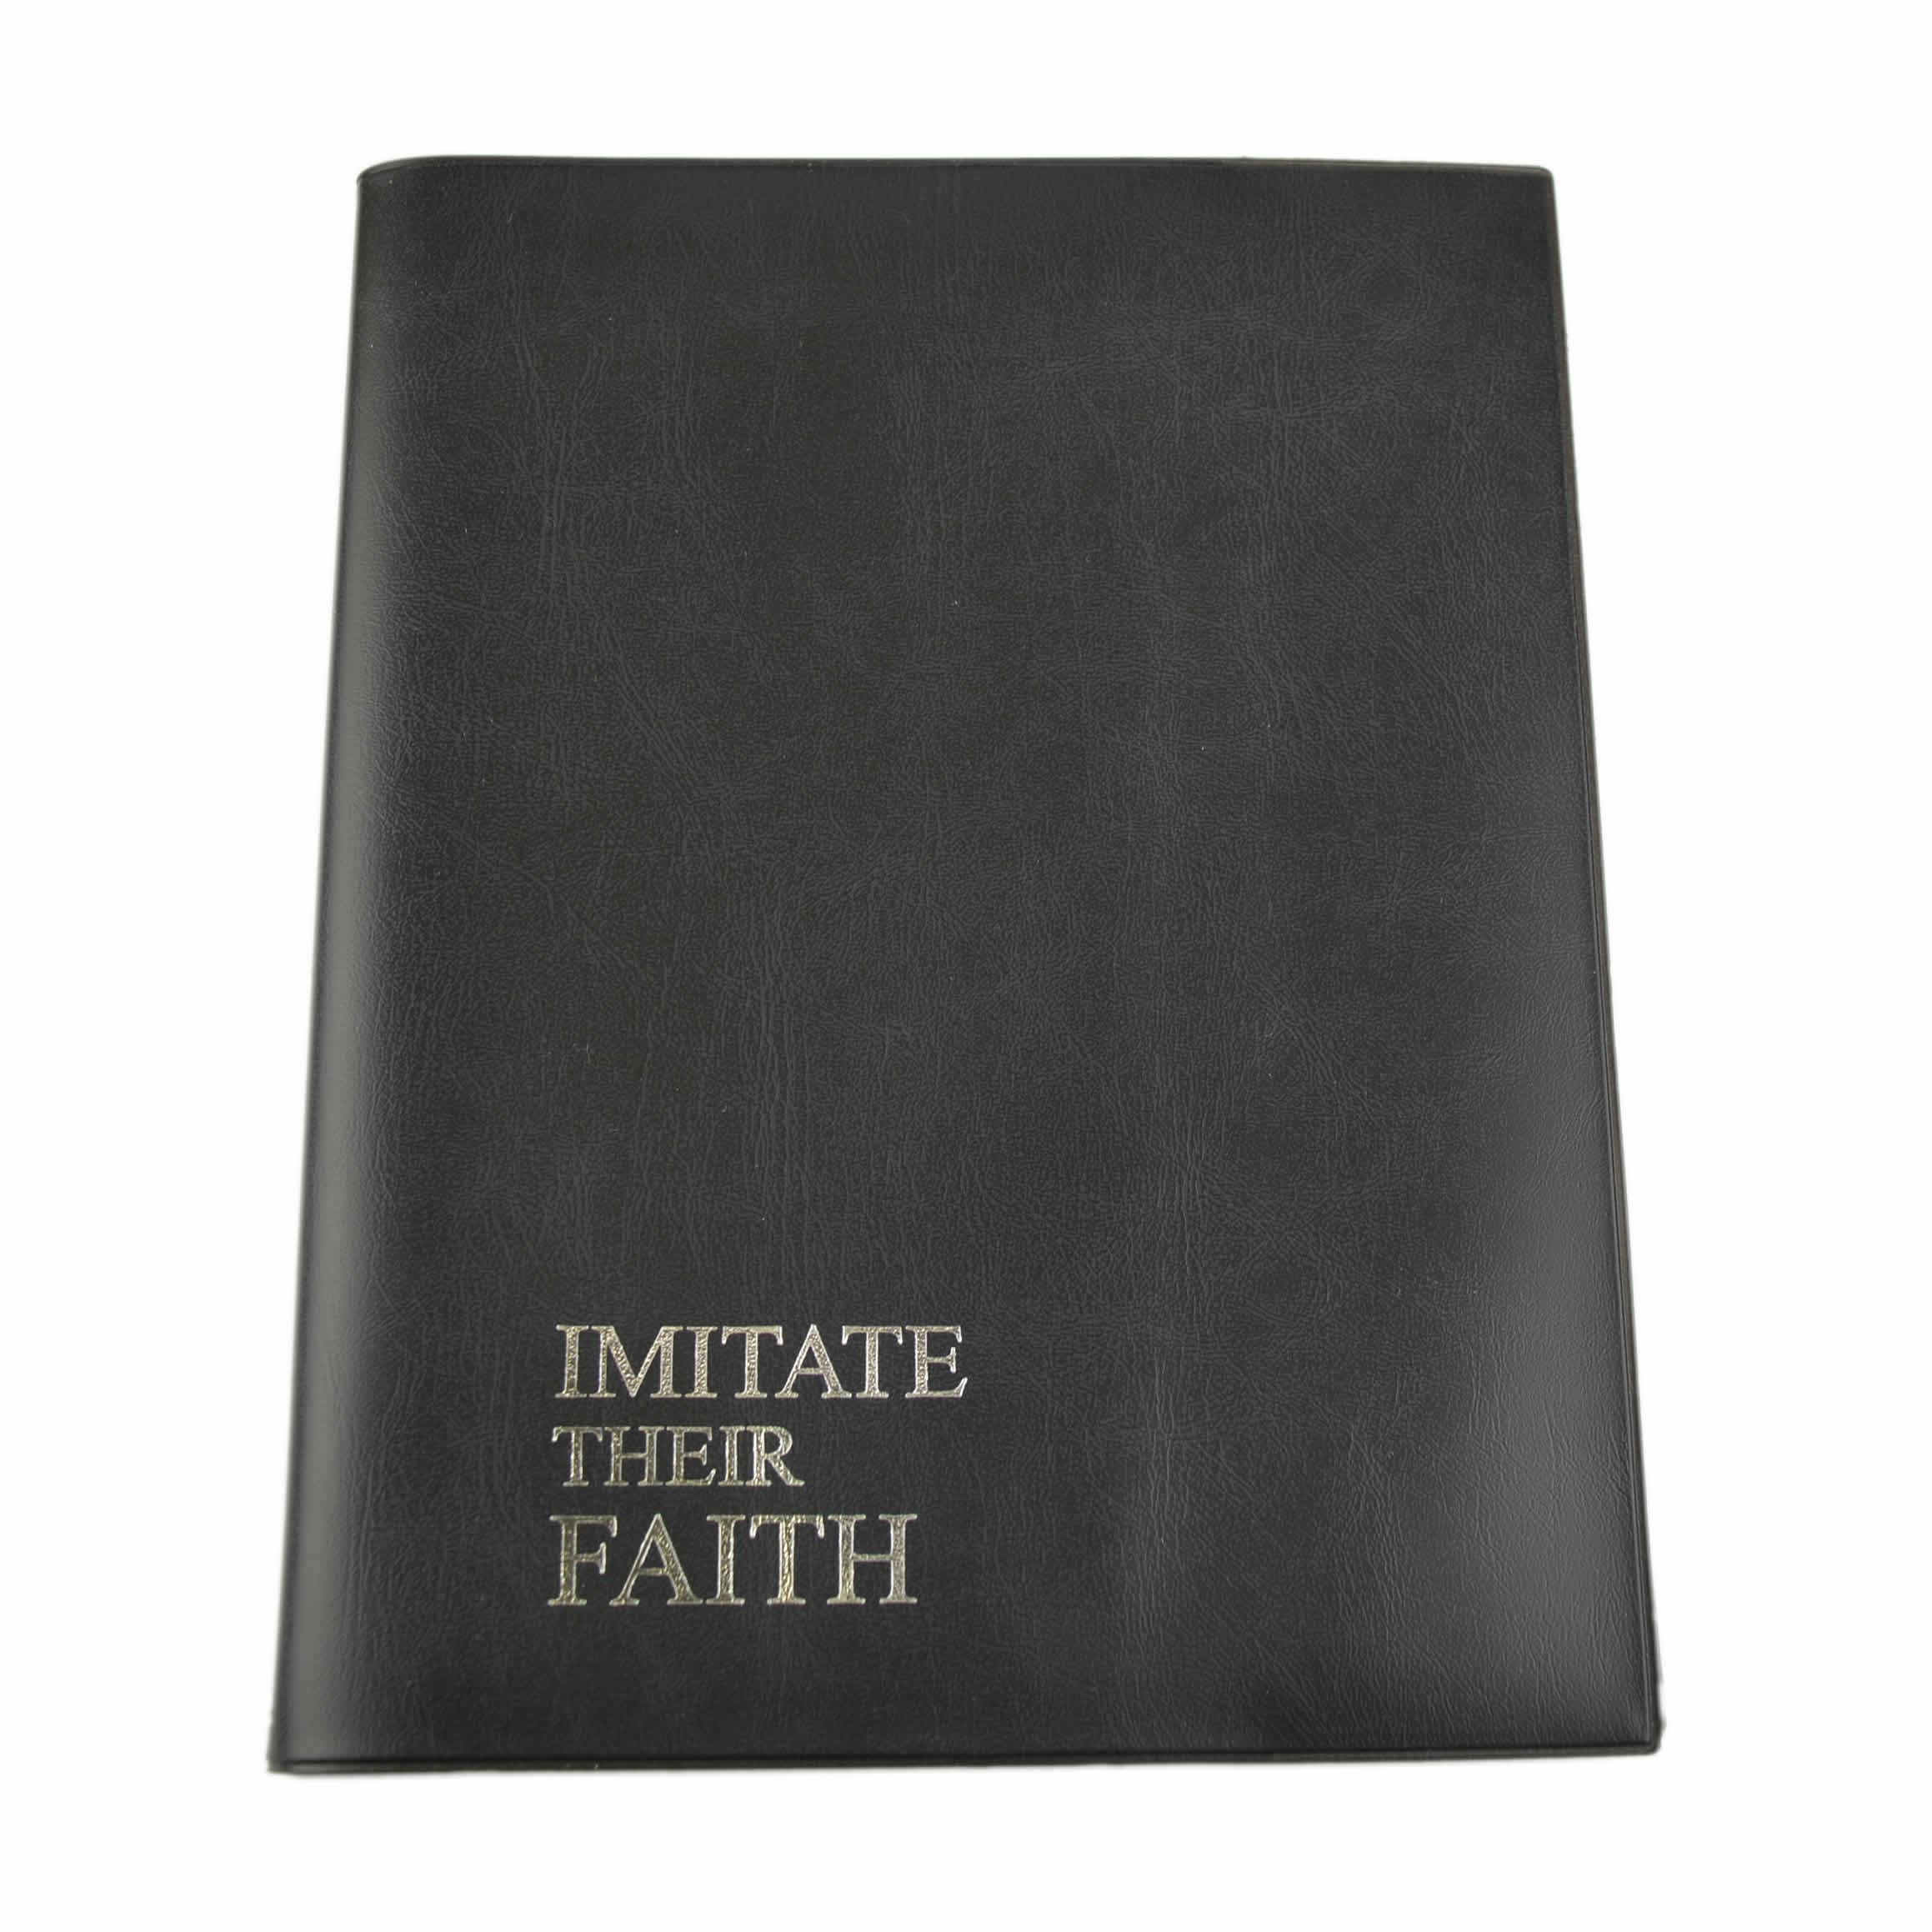 Vinyl Cover for Imitate Their Faith Book - Embossed  - Black